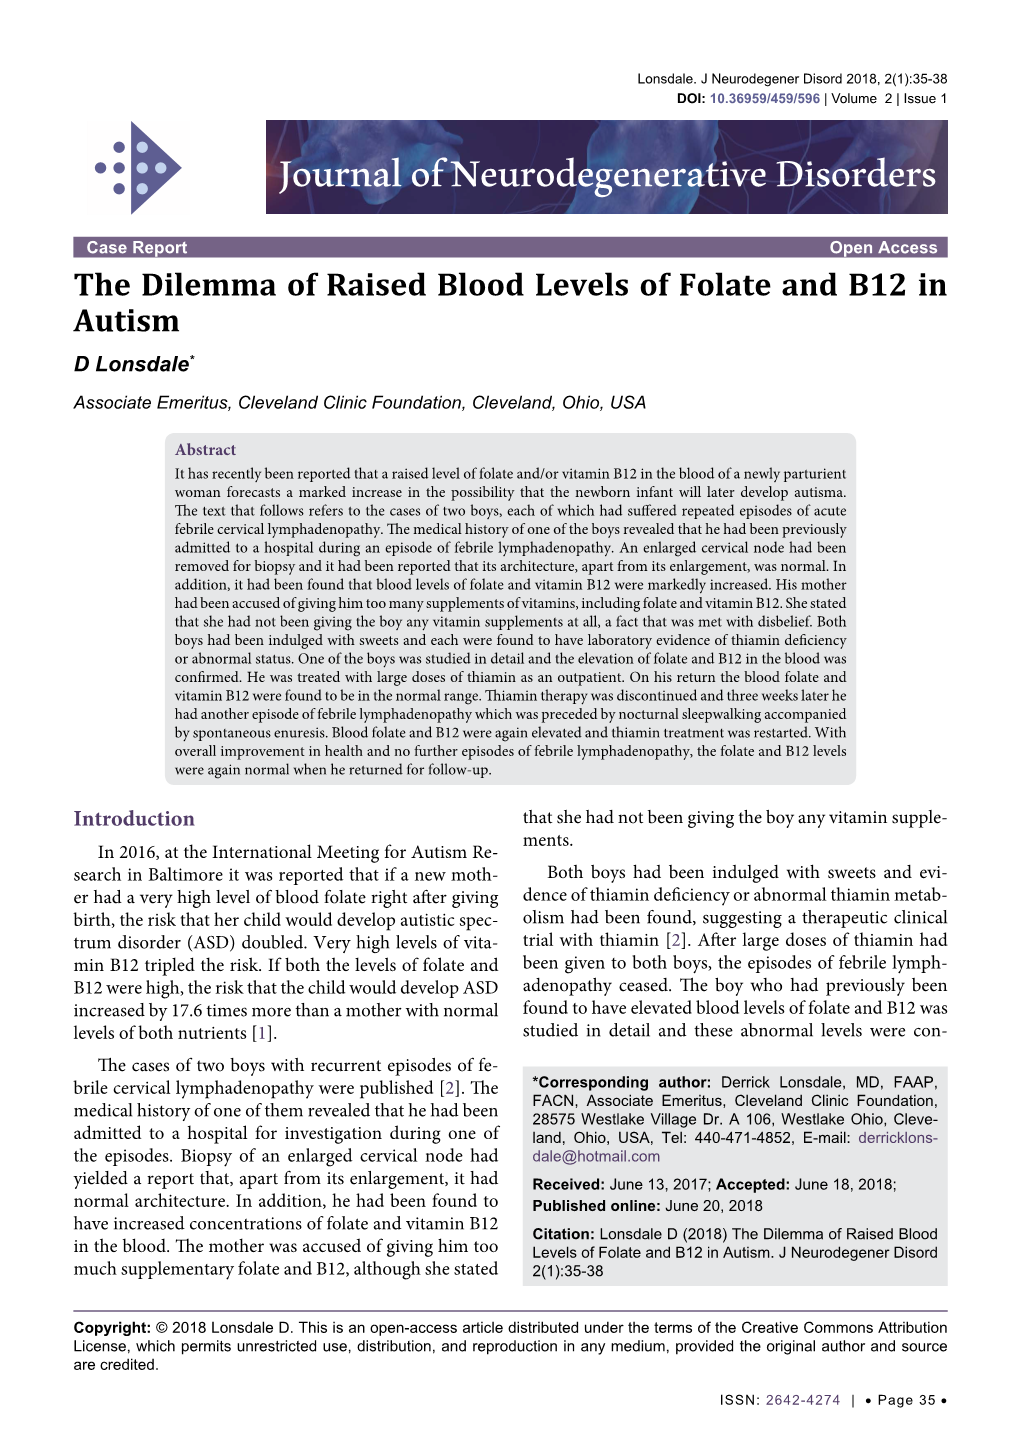 The Dilemma of Raised Blood Levels of Folate and B12 in Autism D Lonsdale* Associate Emeritus, Cleveland Clinic Foundation, Cleveland, Ohio, USA